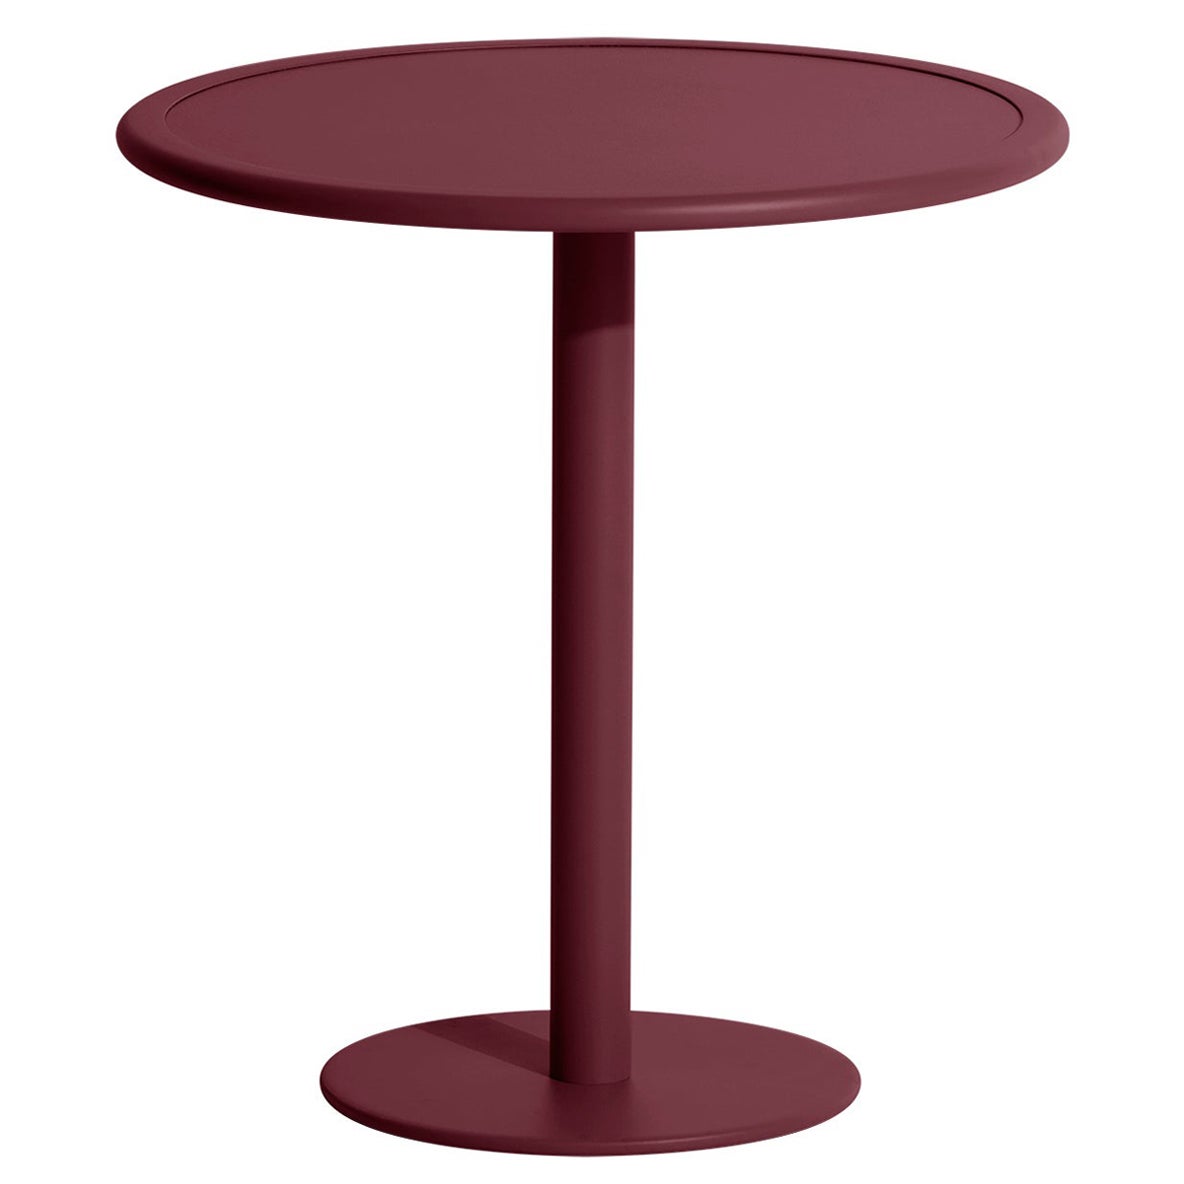 Petite Friture Week-End Bistro Round Dining Table in Burgundy Aluminium, 2017 For Sale